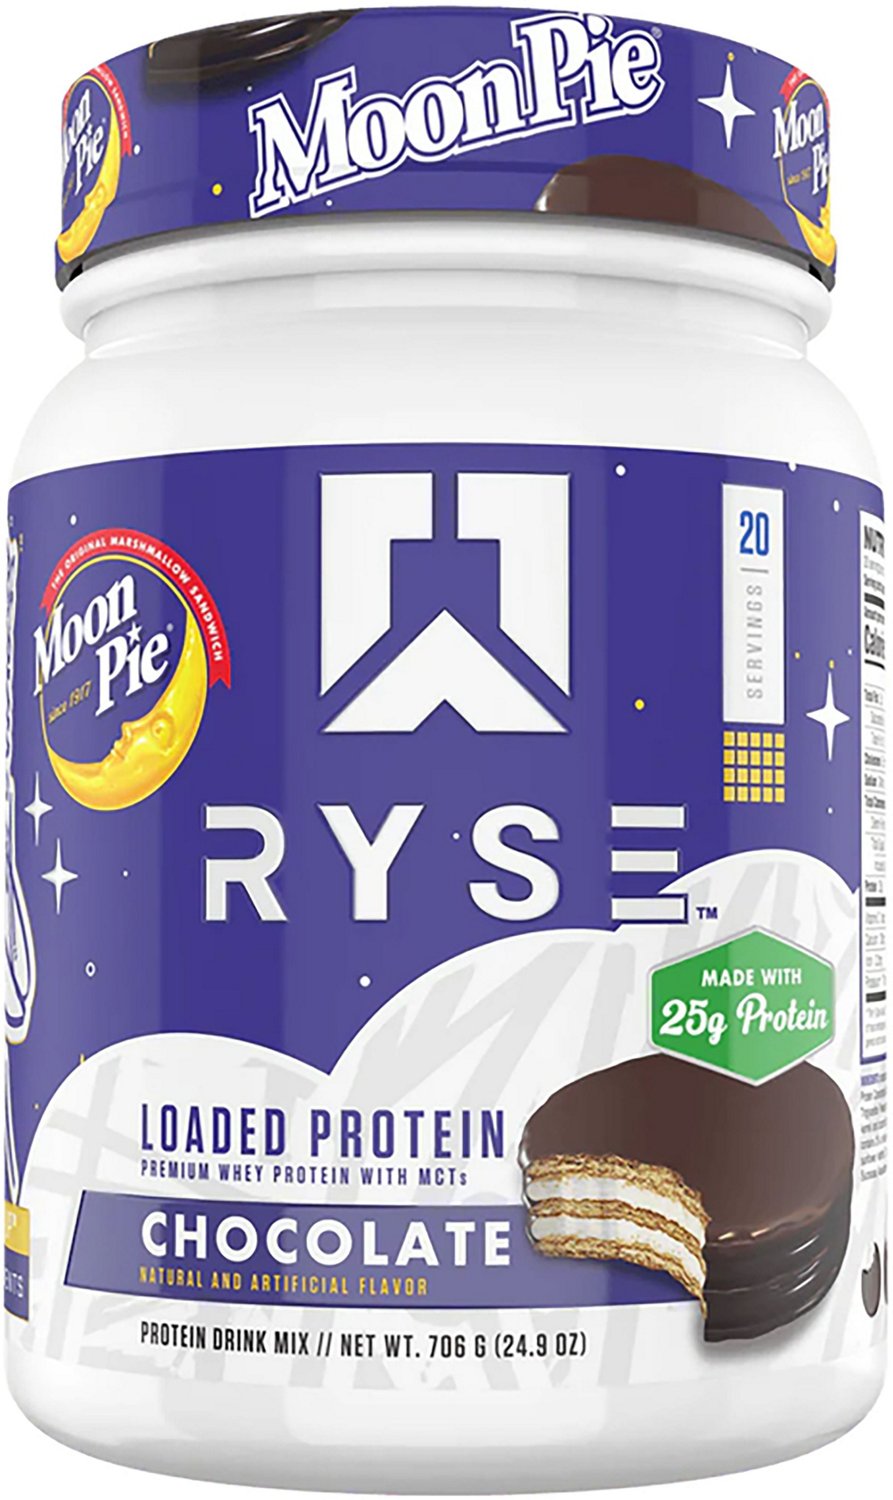 Ryse 2 lb Loaded Protein                                                                                                         - view number 1 selected